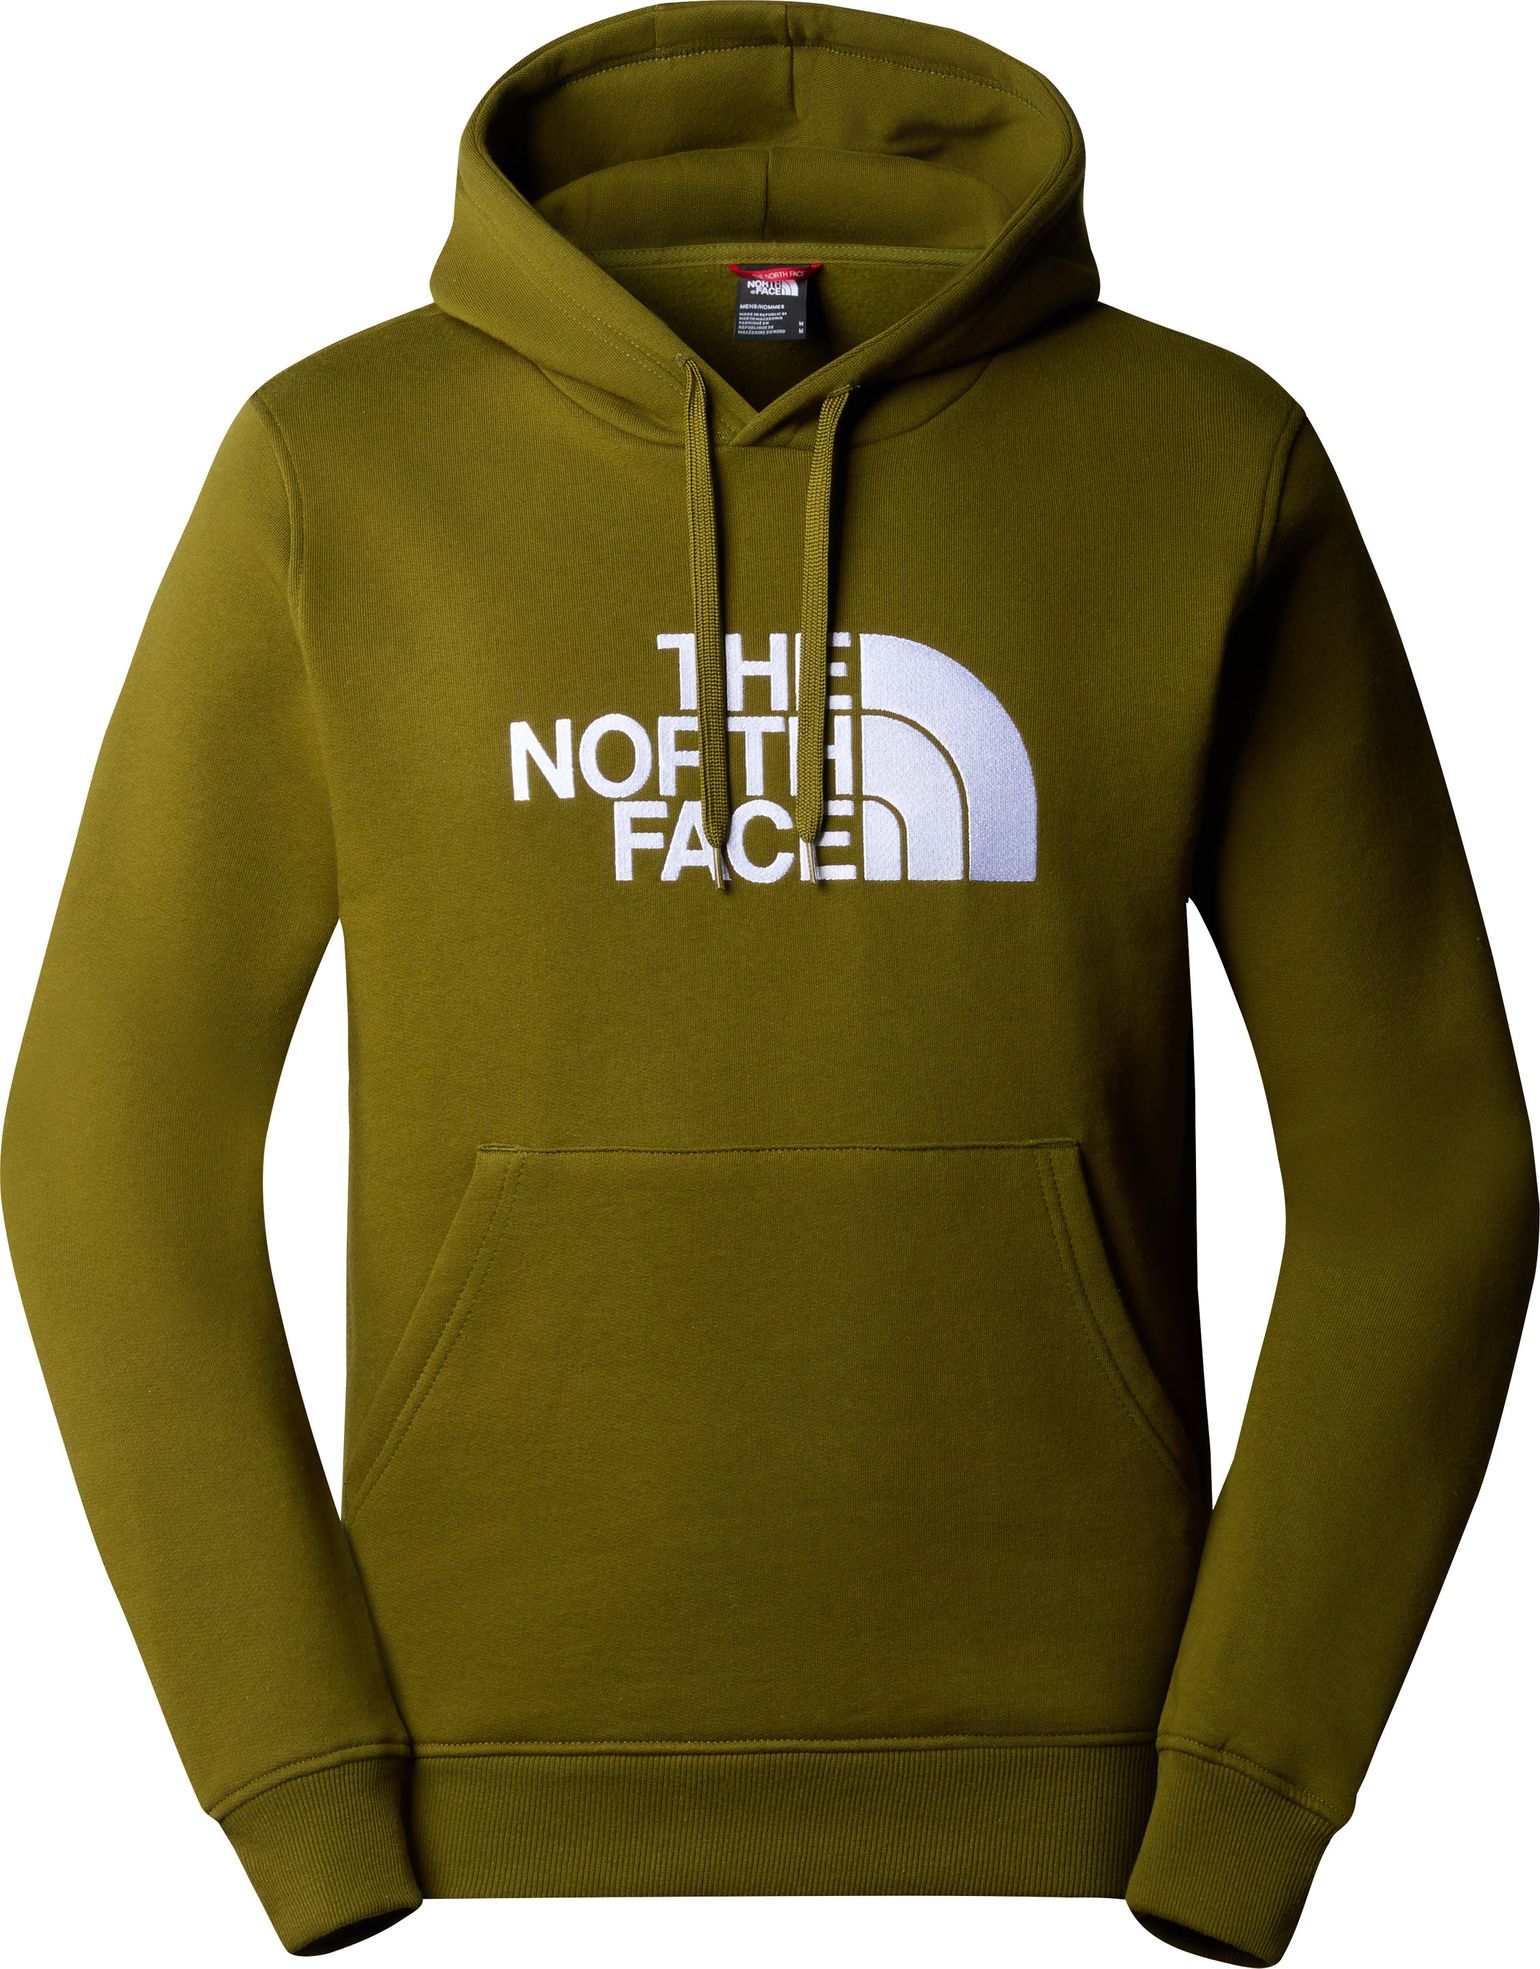 The North Face Men's Drew Peak Pullover Hoodie Forest Olive